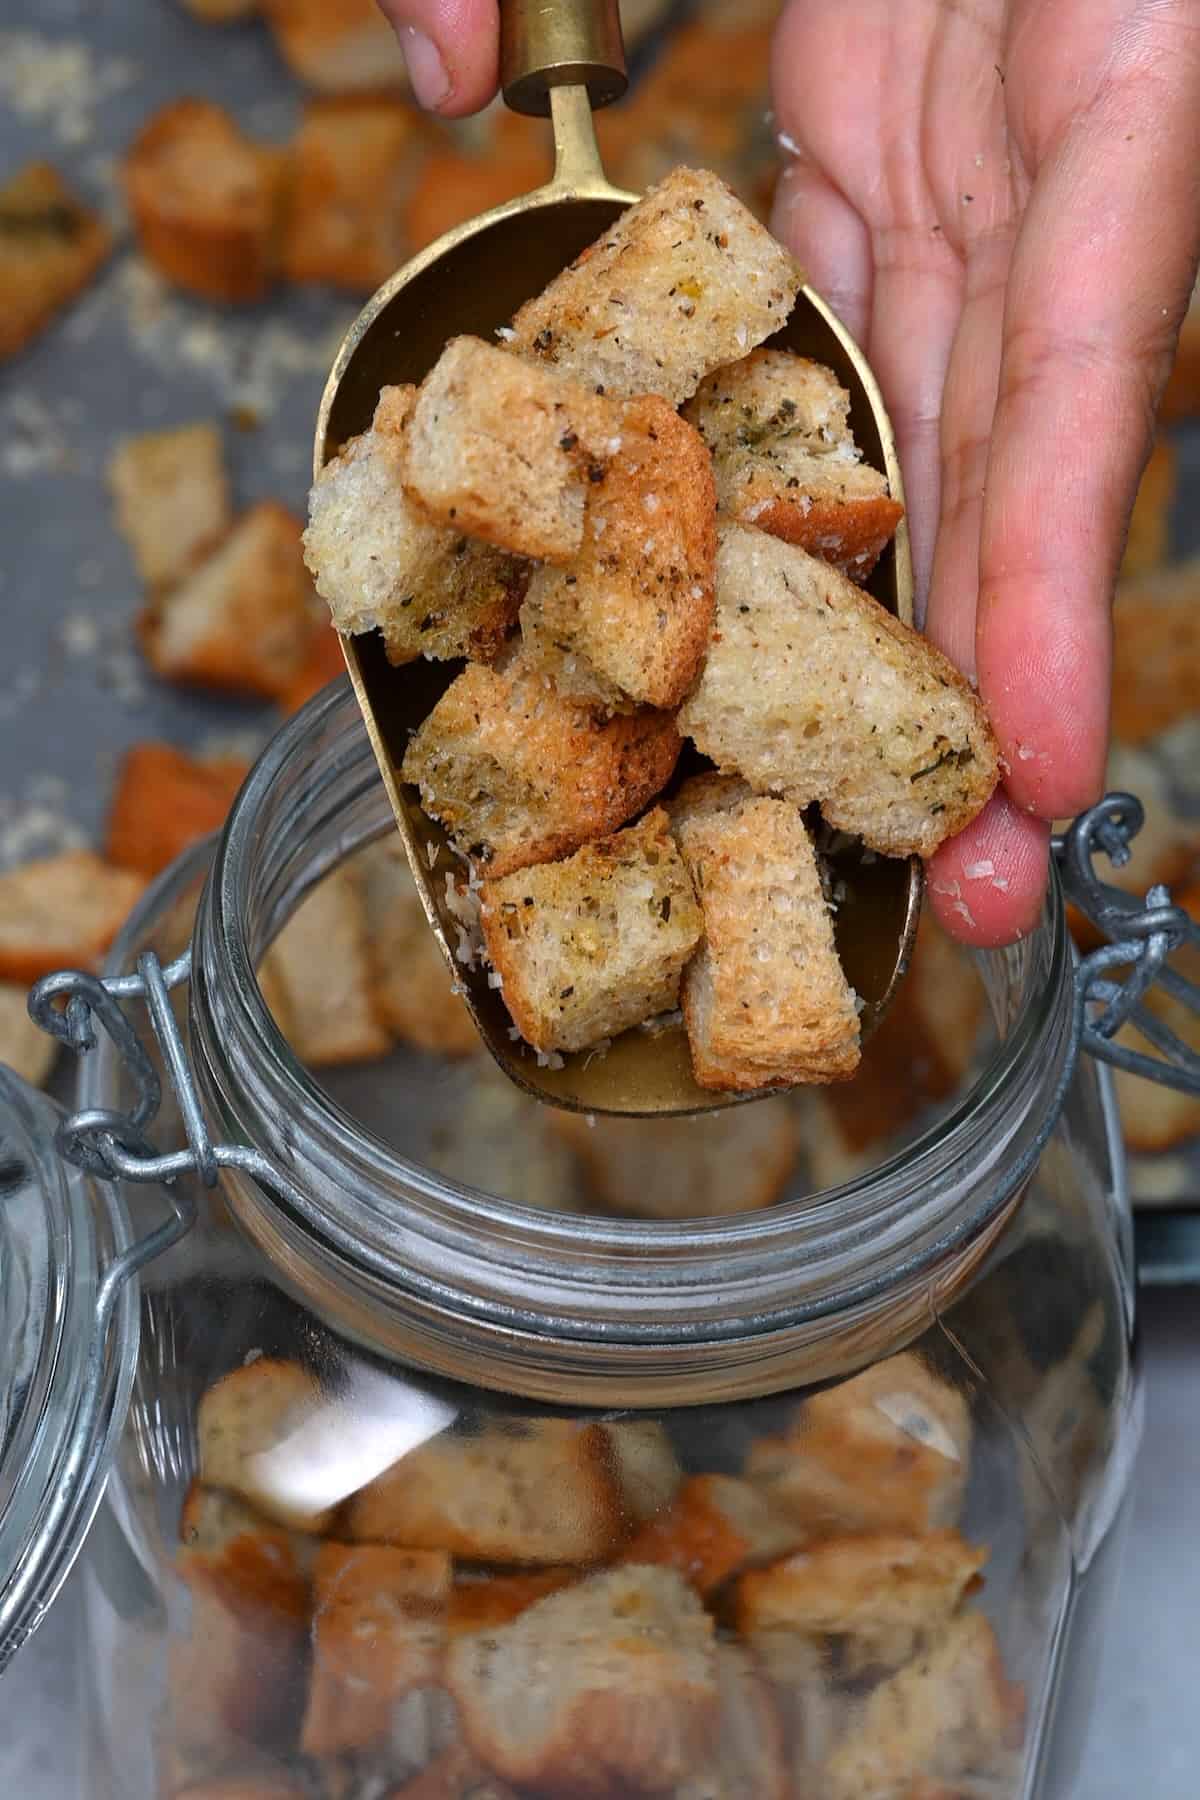 Placing homemade croutons in a jar